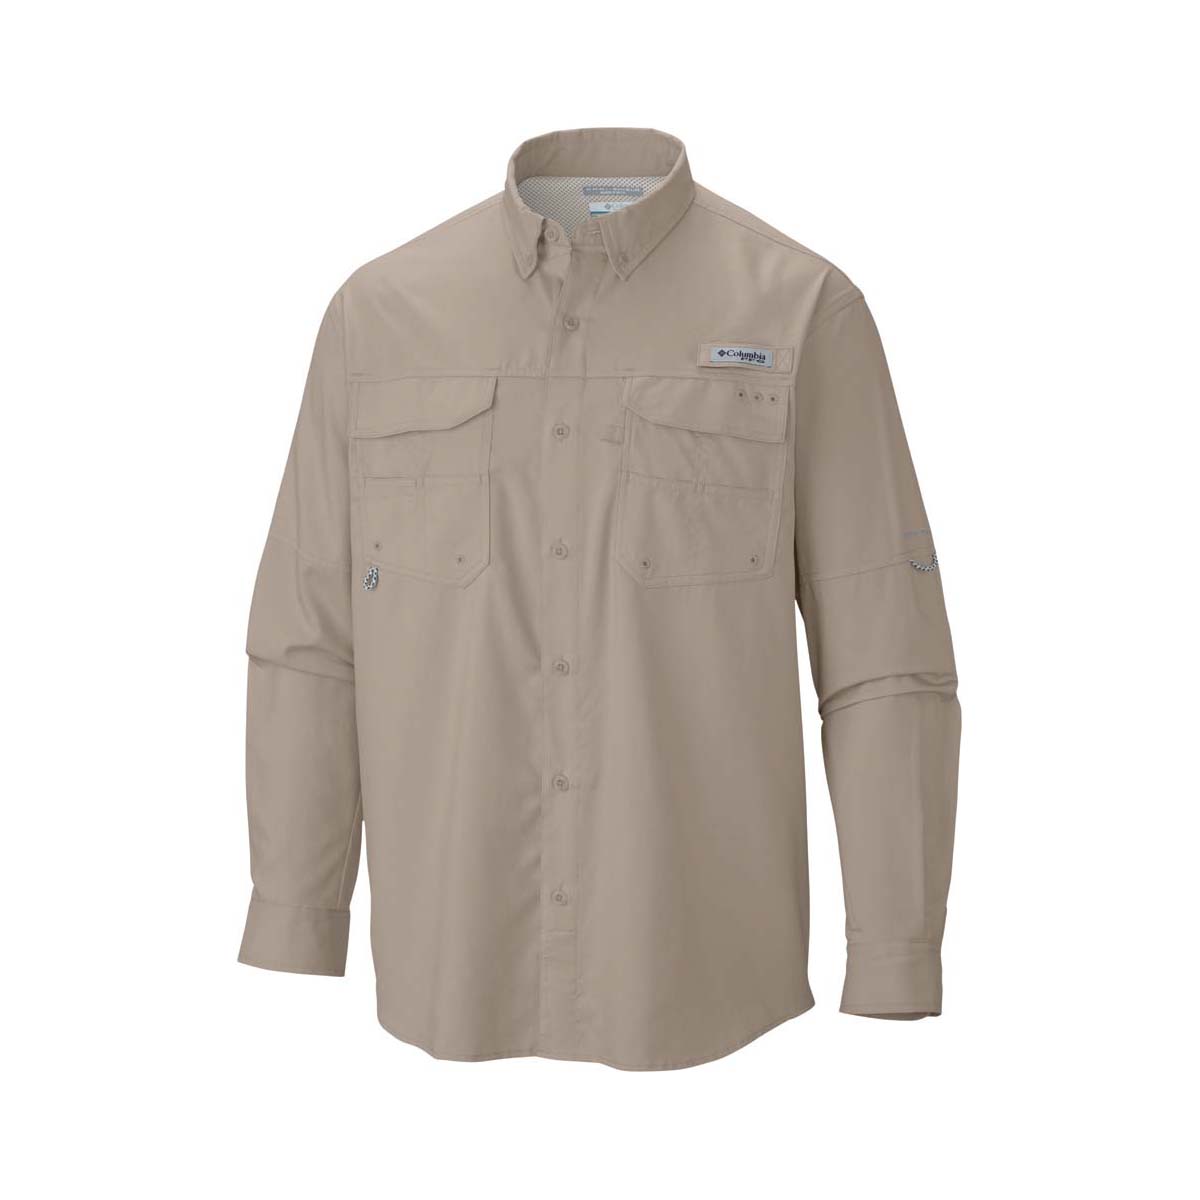 Columbia Men's Blood and Guts IV Long Sleeve Fishing Shirt Fossil S